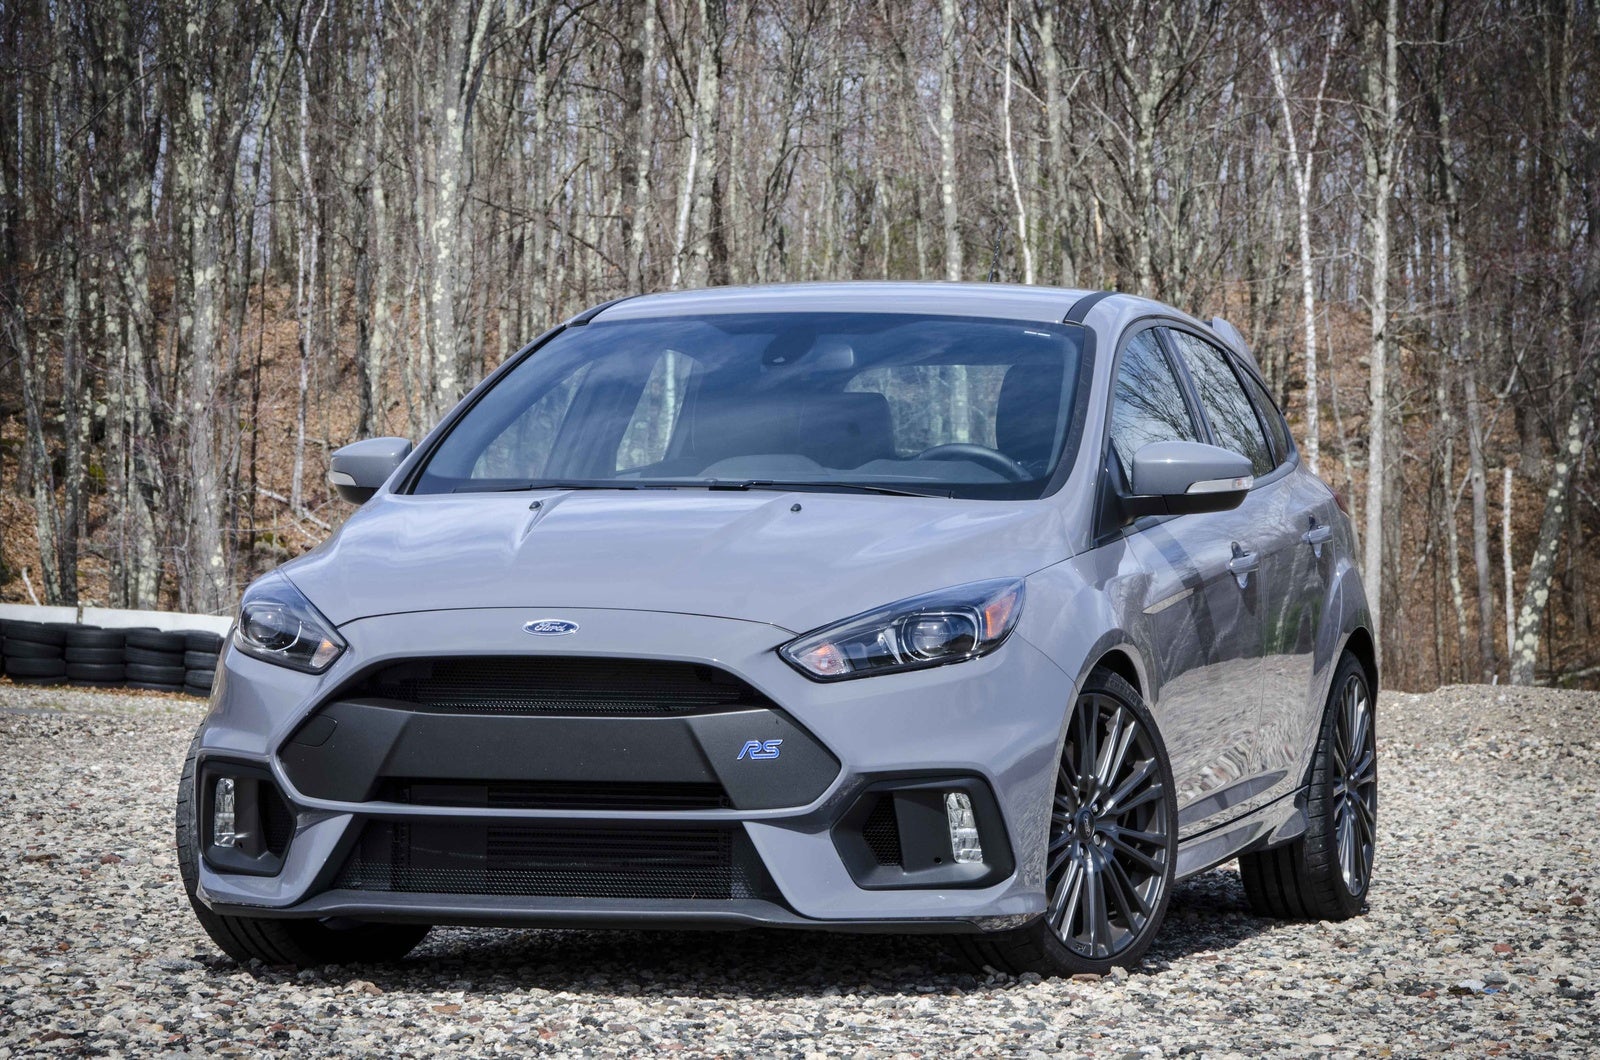 2017 Ford Focus RS for Sale in Los Angeles, CA  CarGurus